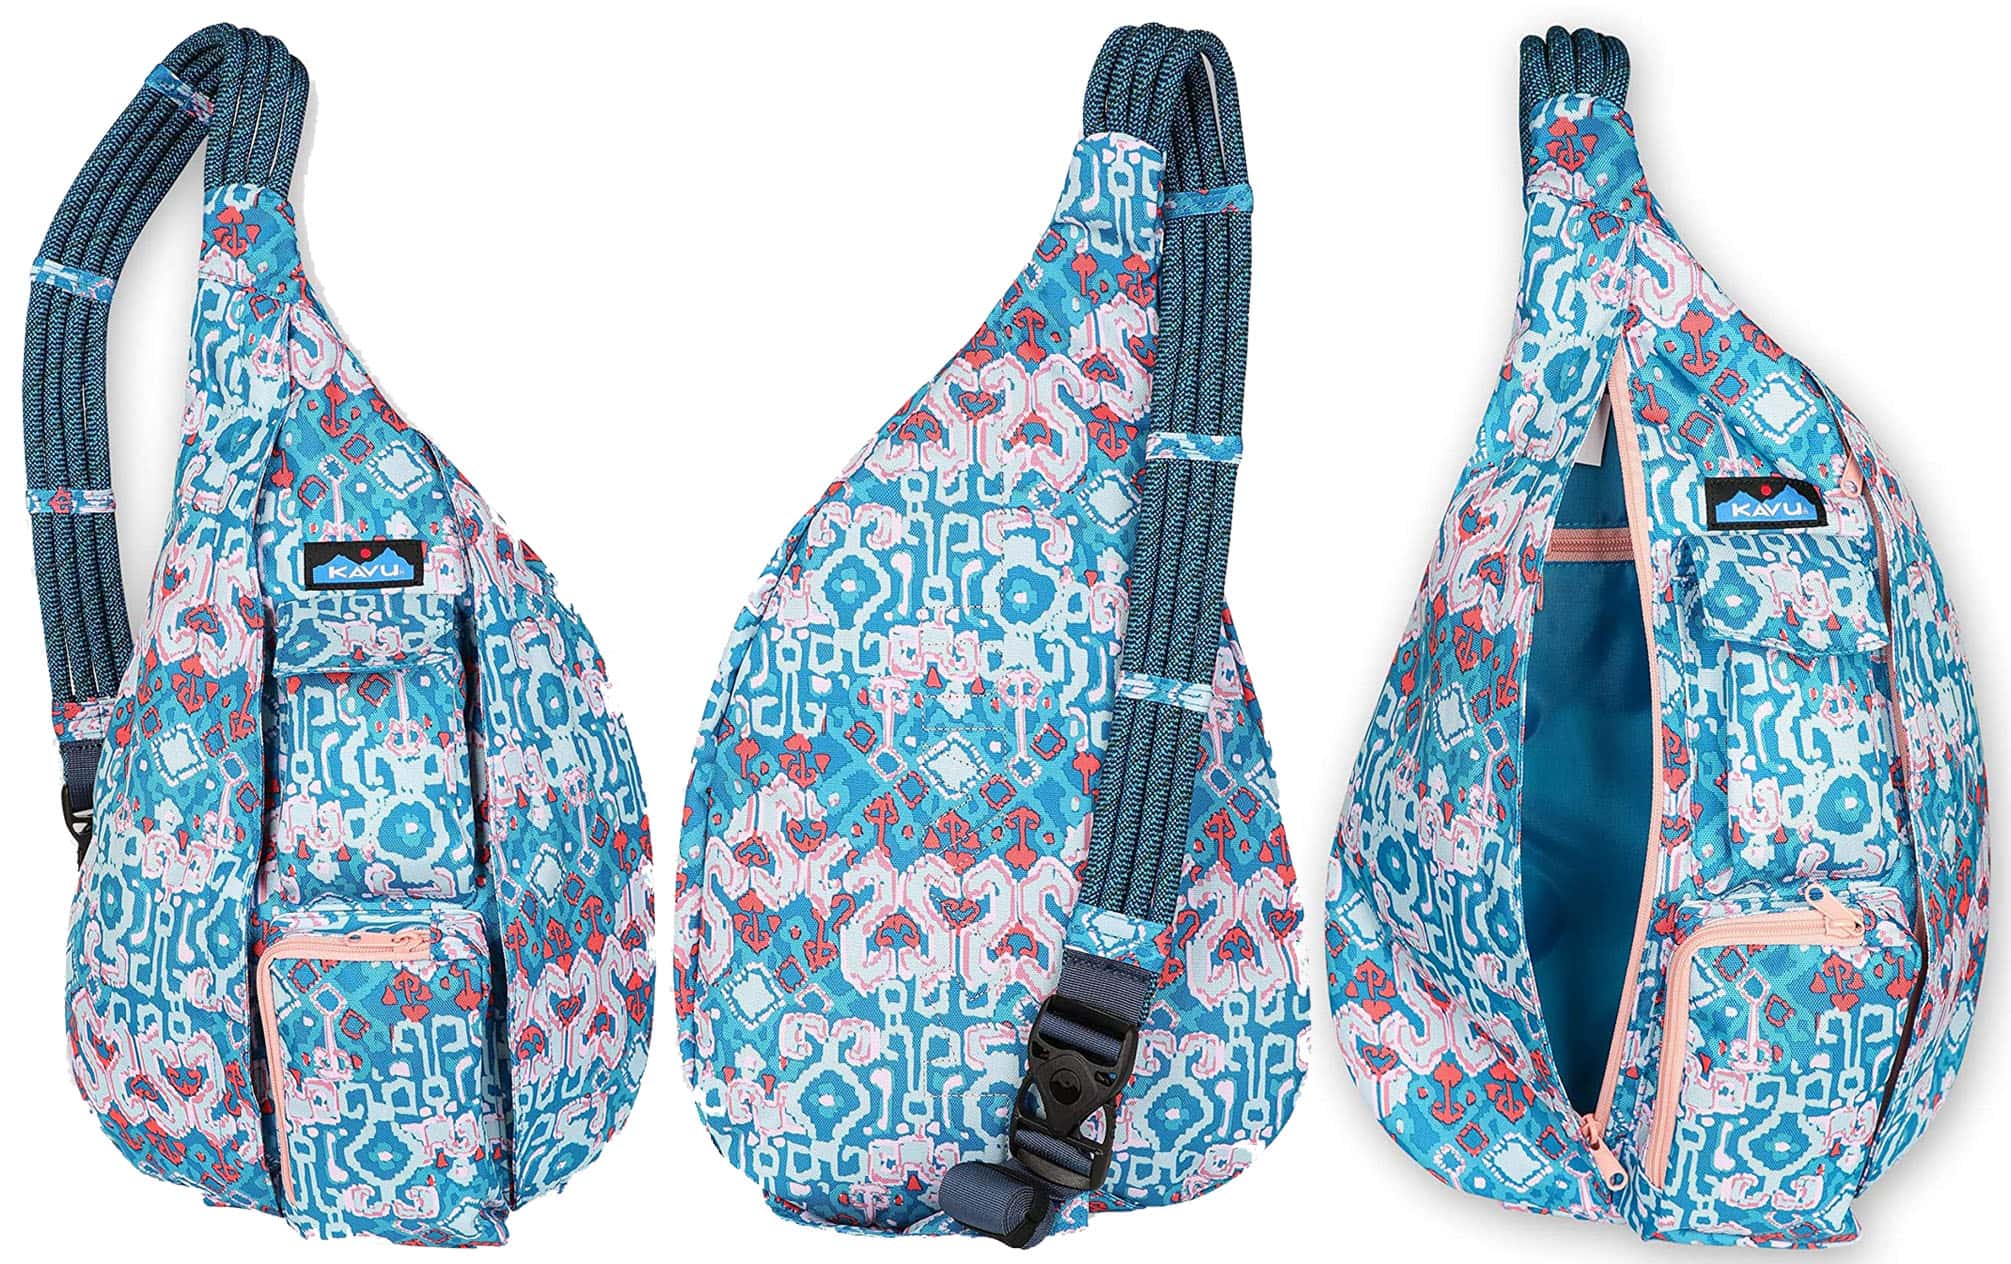 This water-resistant Rope Sling bag from active lifestyle brand Kavu is made of polyester and features an ultra-comfortable rope shoulder strap and multiple pockets and compartments